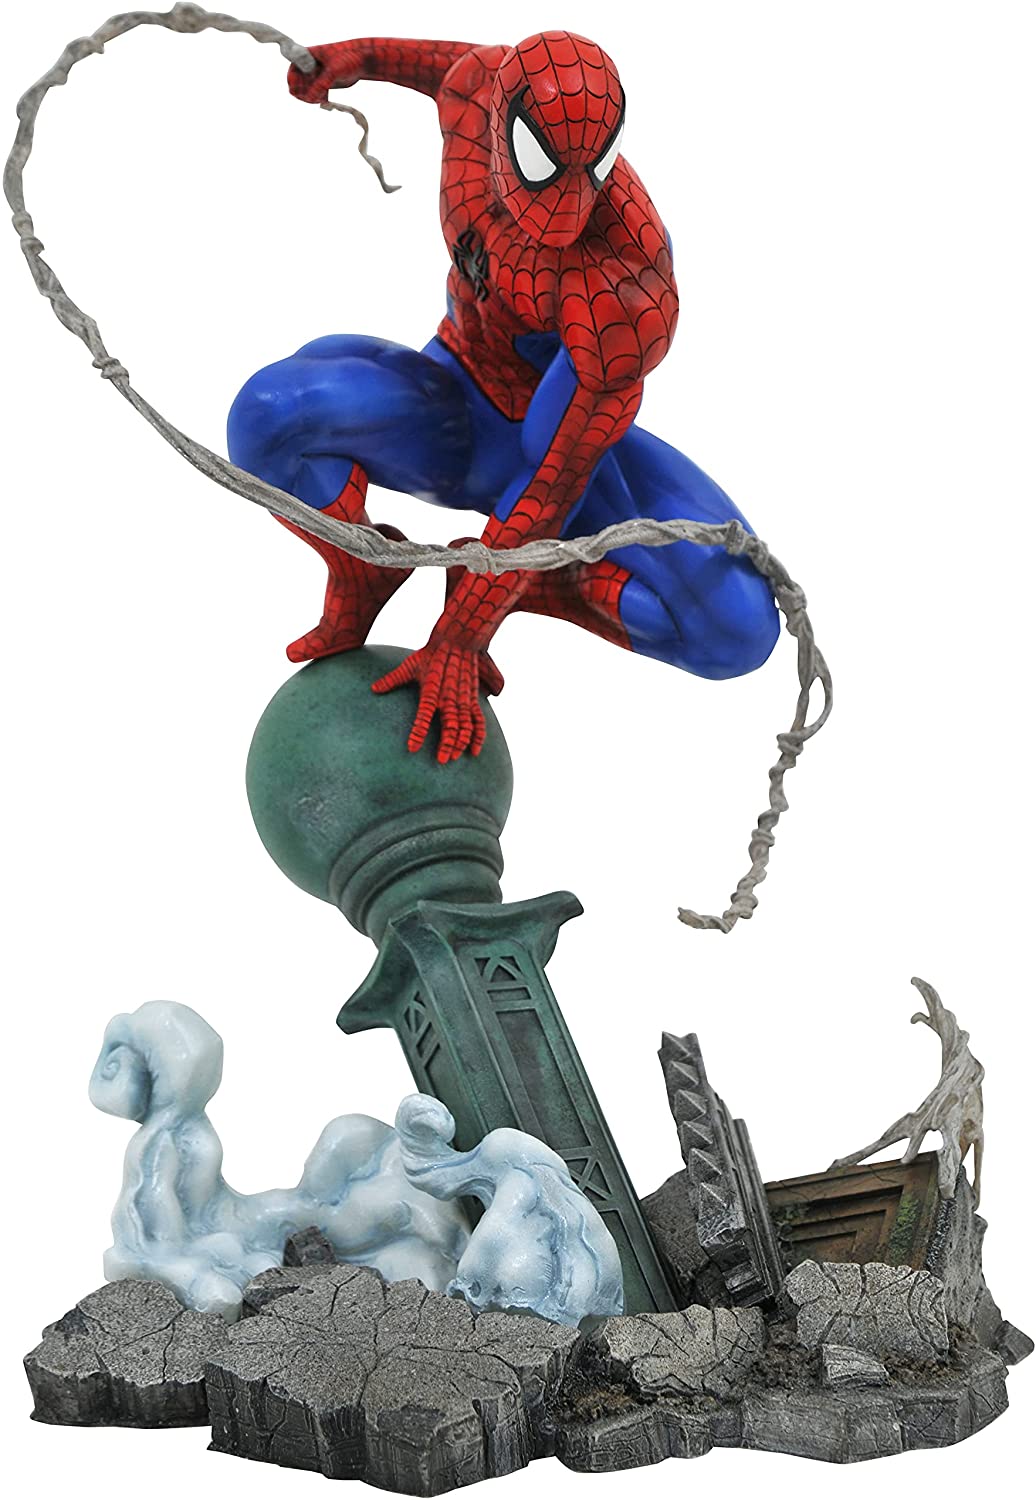 Blue & Red Marvel Spiderman Avengers Figurine: Cast Metal Collectable Statue